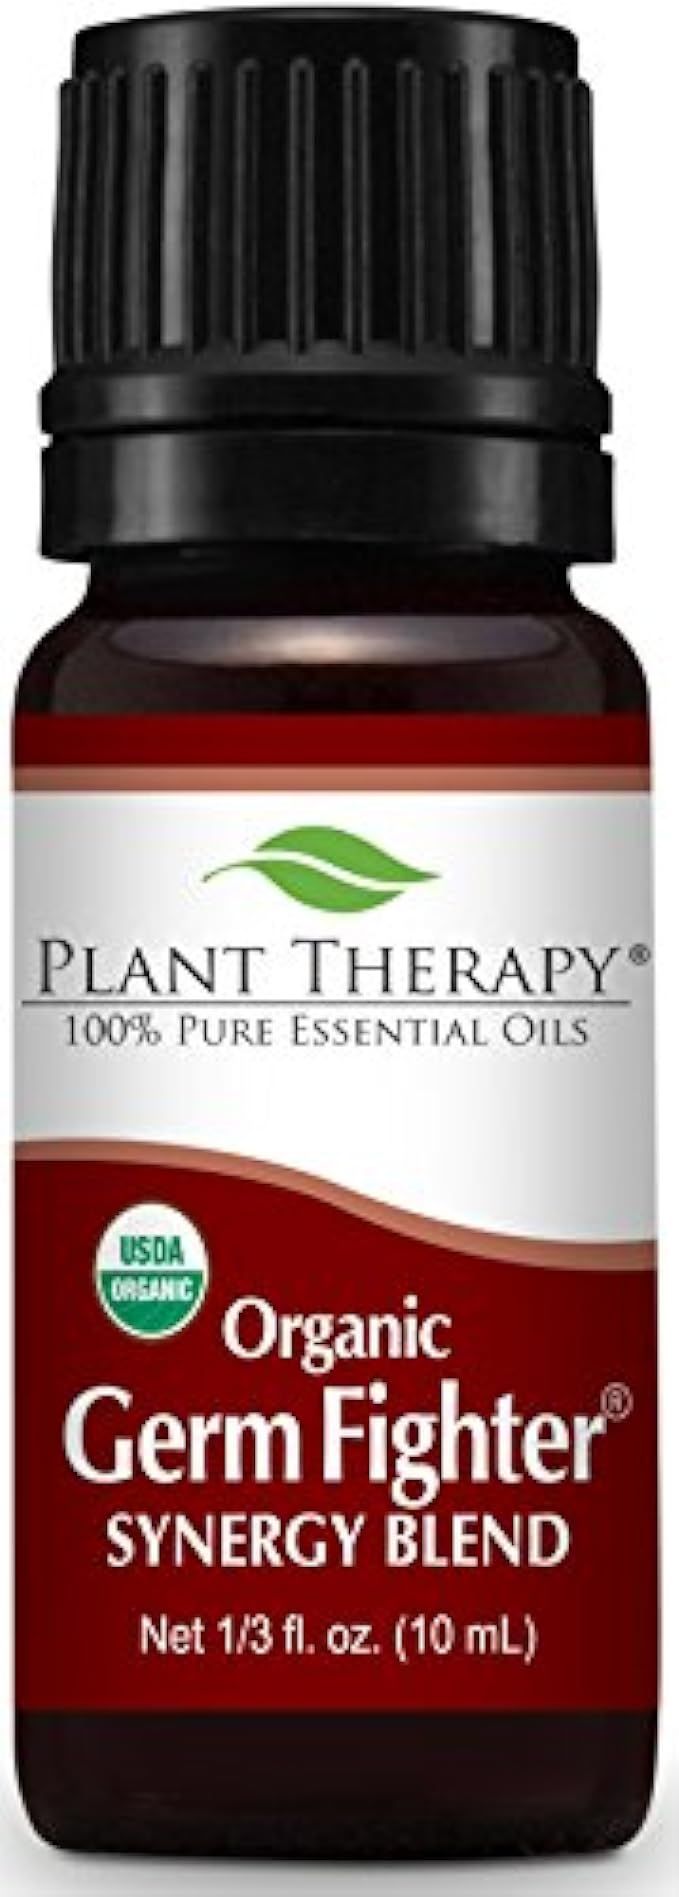 Plant Therapy Germ Fighter Organic Synergy Essential Oil 10 mL (1/3 oz) 100% Pure, Undiluted, Therap | Amazon (US)